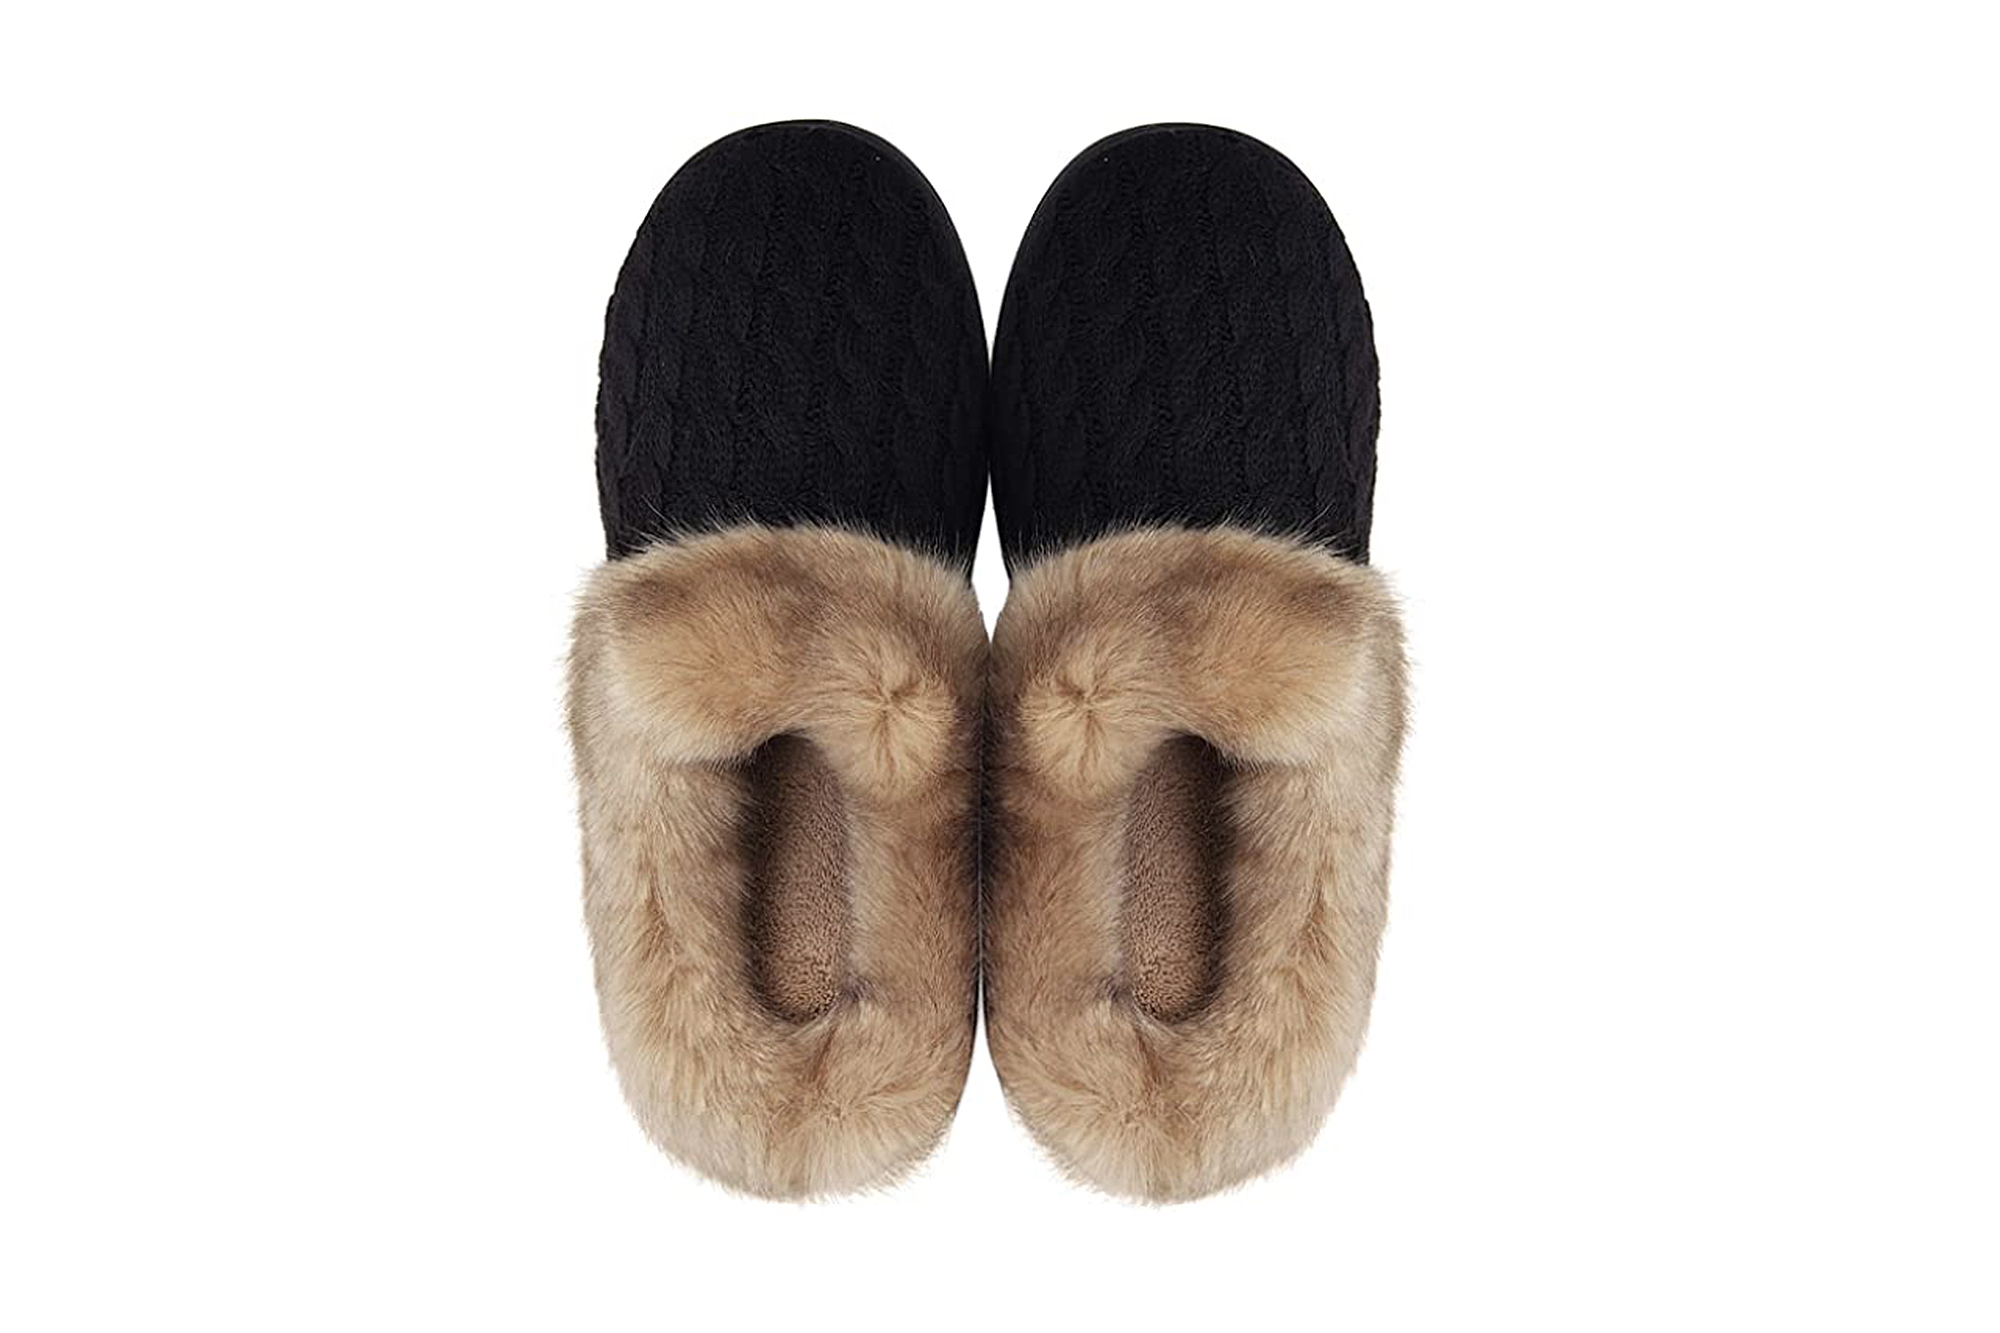 WateLves Under-$30 Plush Slippers Are 